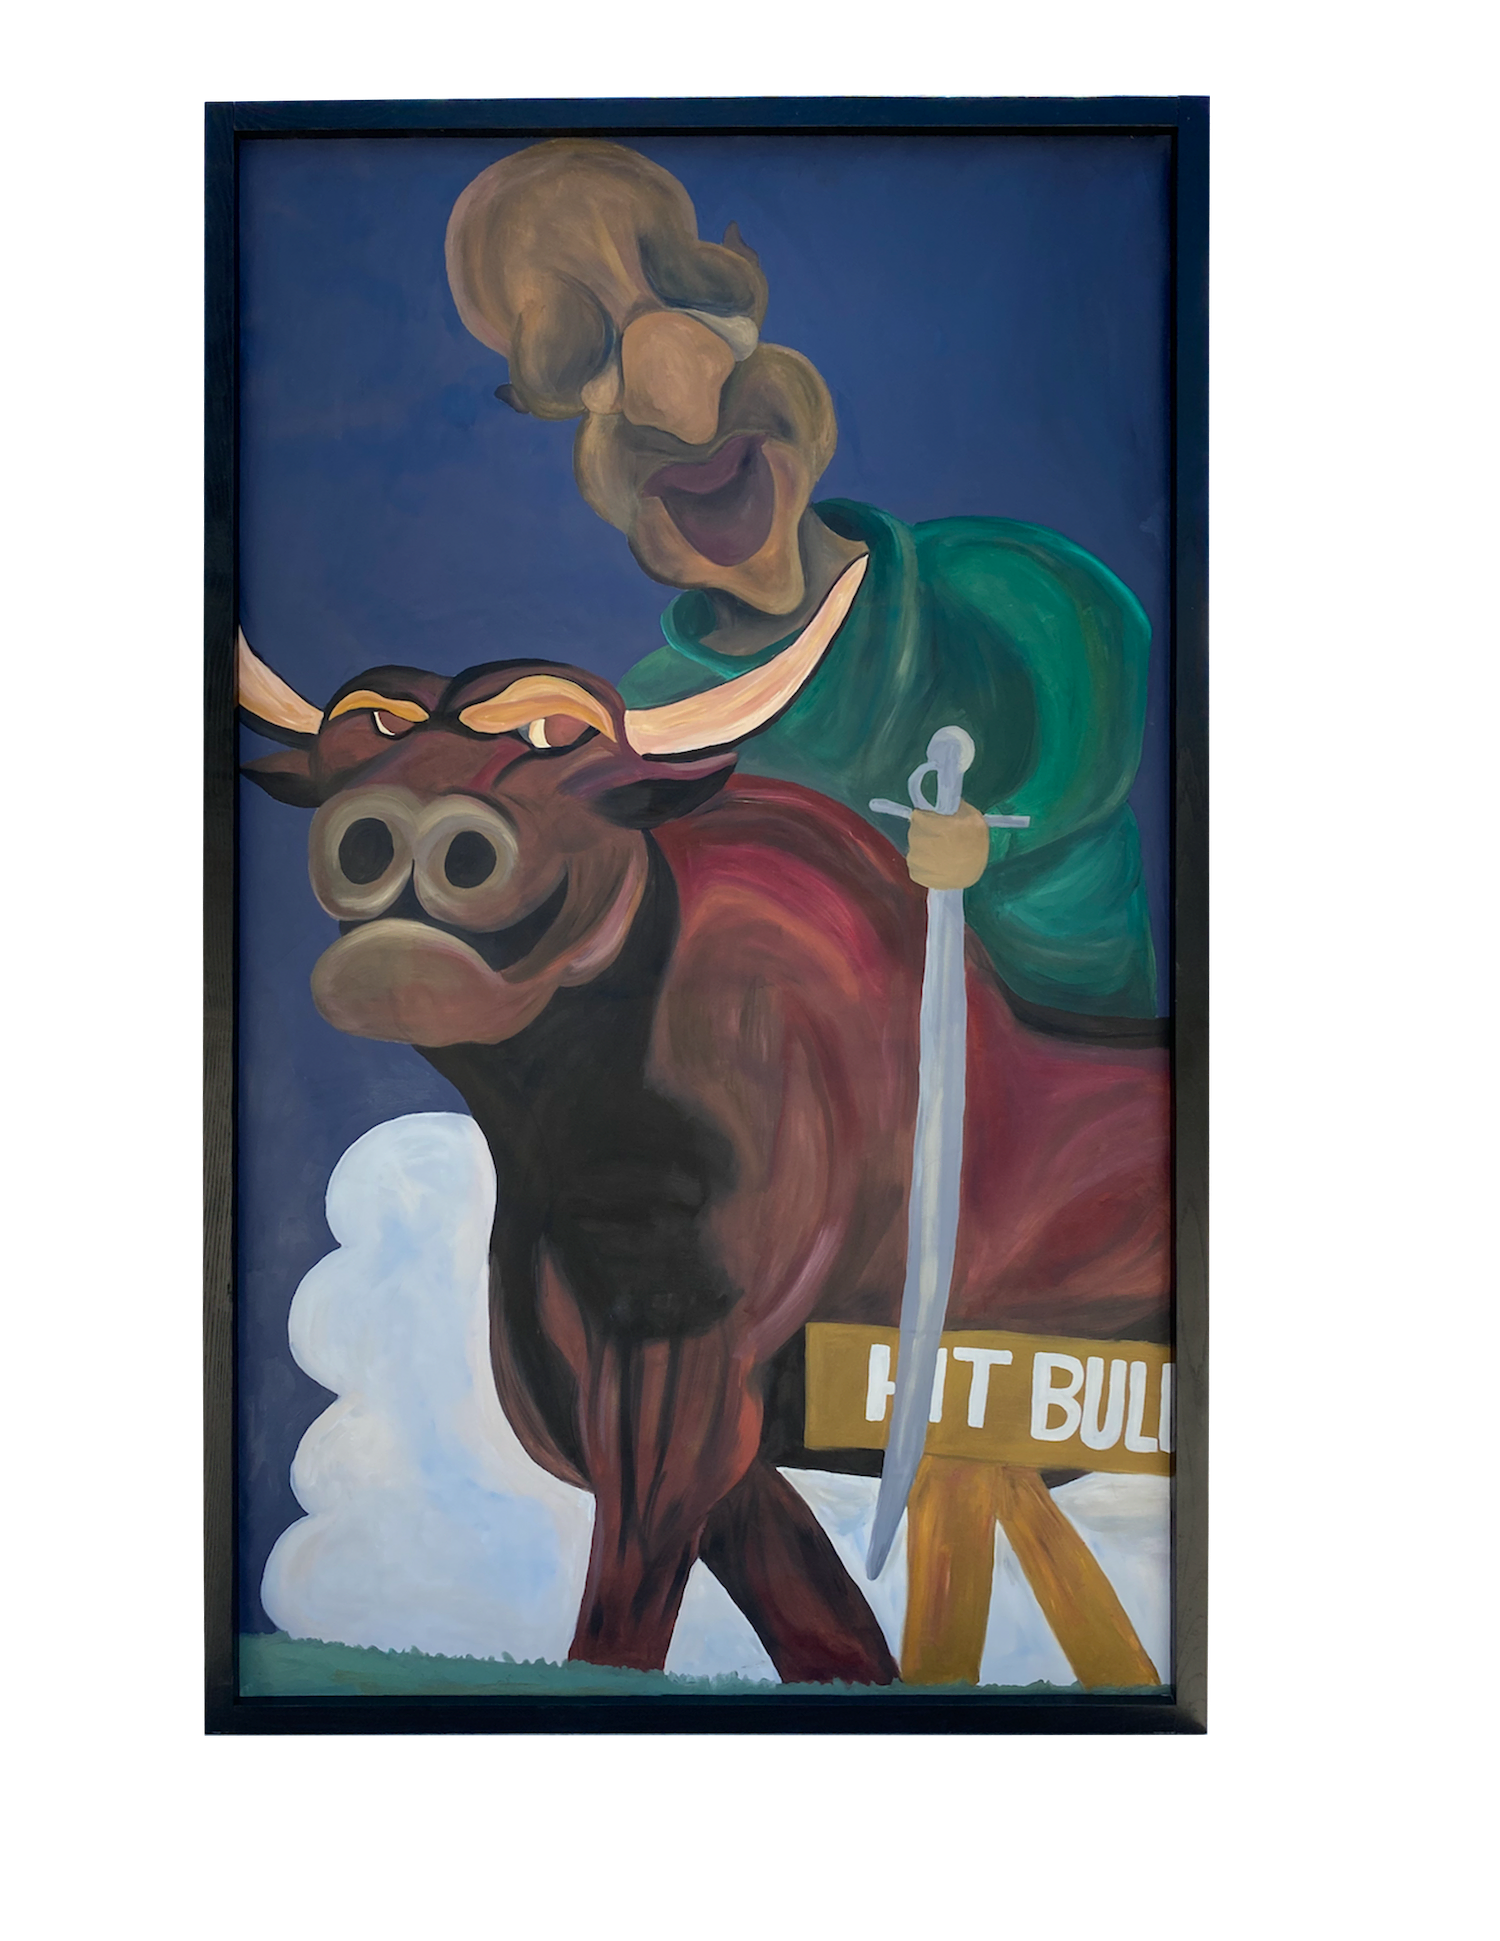 An abstracted painting of a Black figure conquering the billboard-style bull downtown Durham late in the midnight hour.